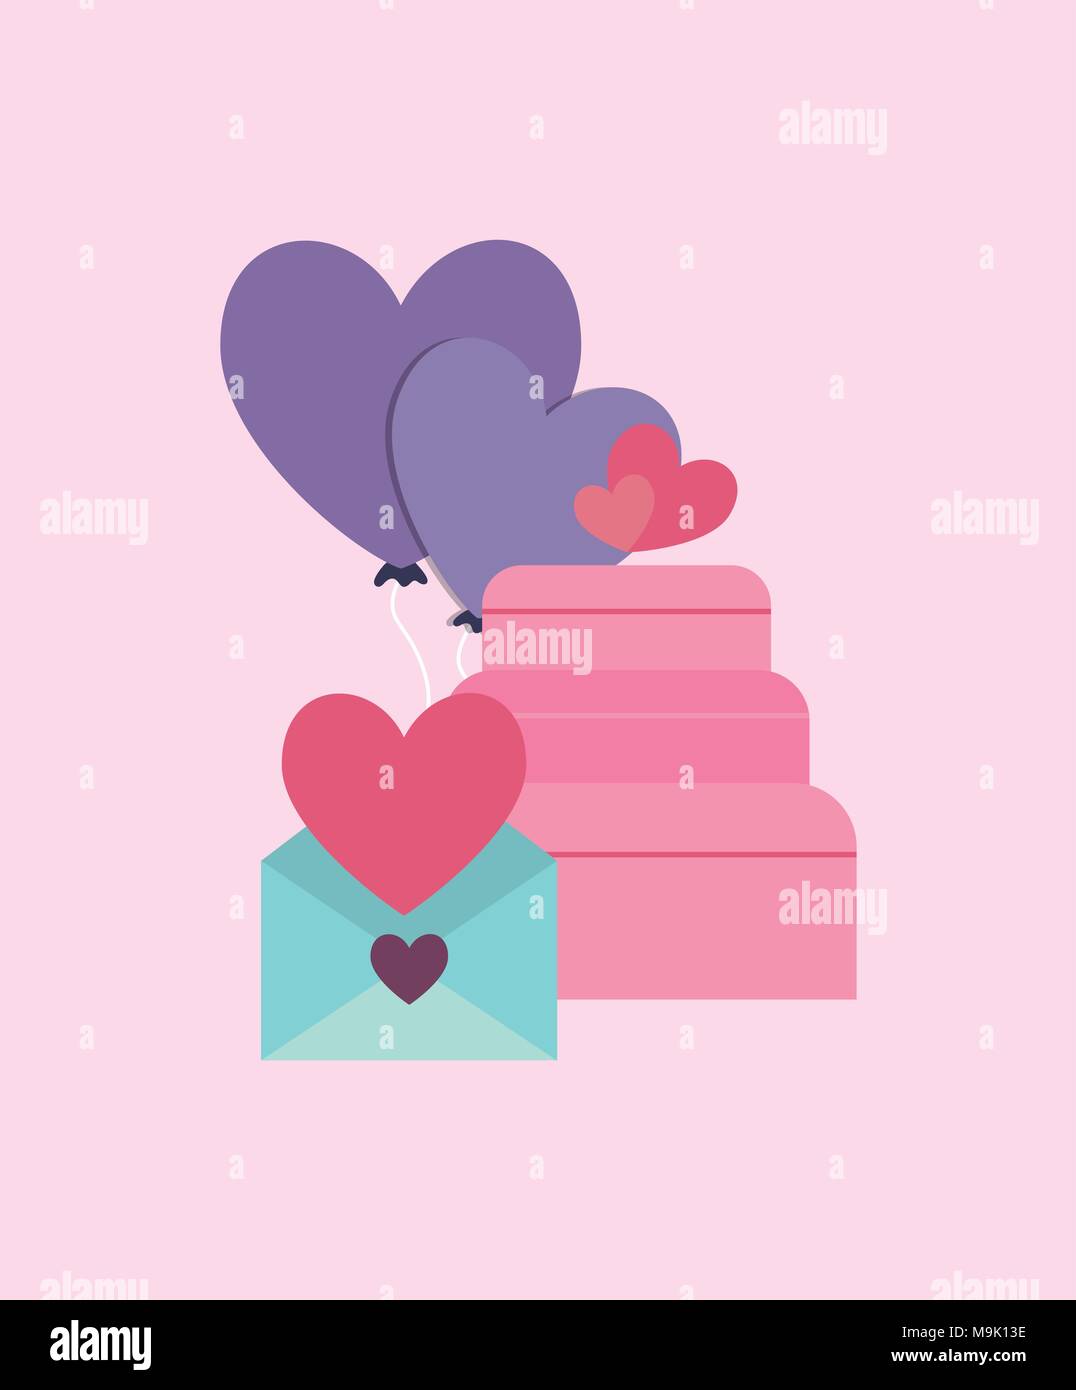 Wedding Cake And Love Letter Over Pink Background Colorful Design